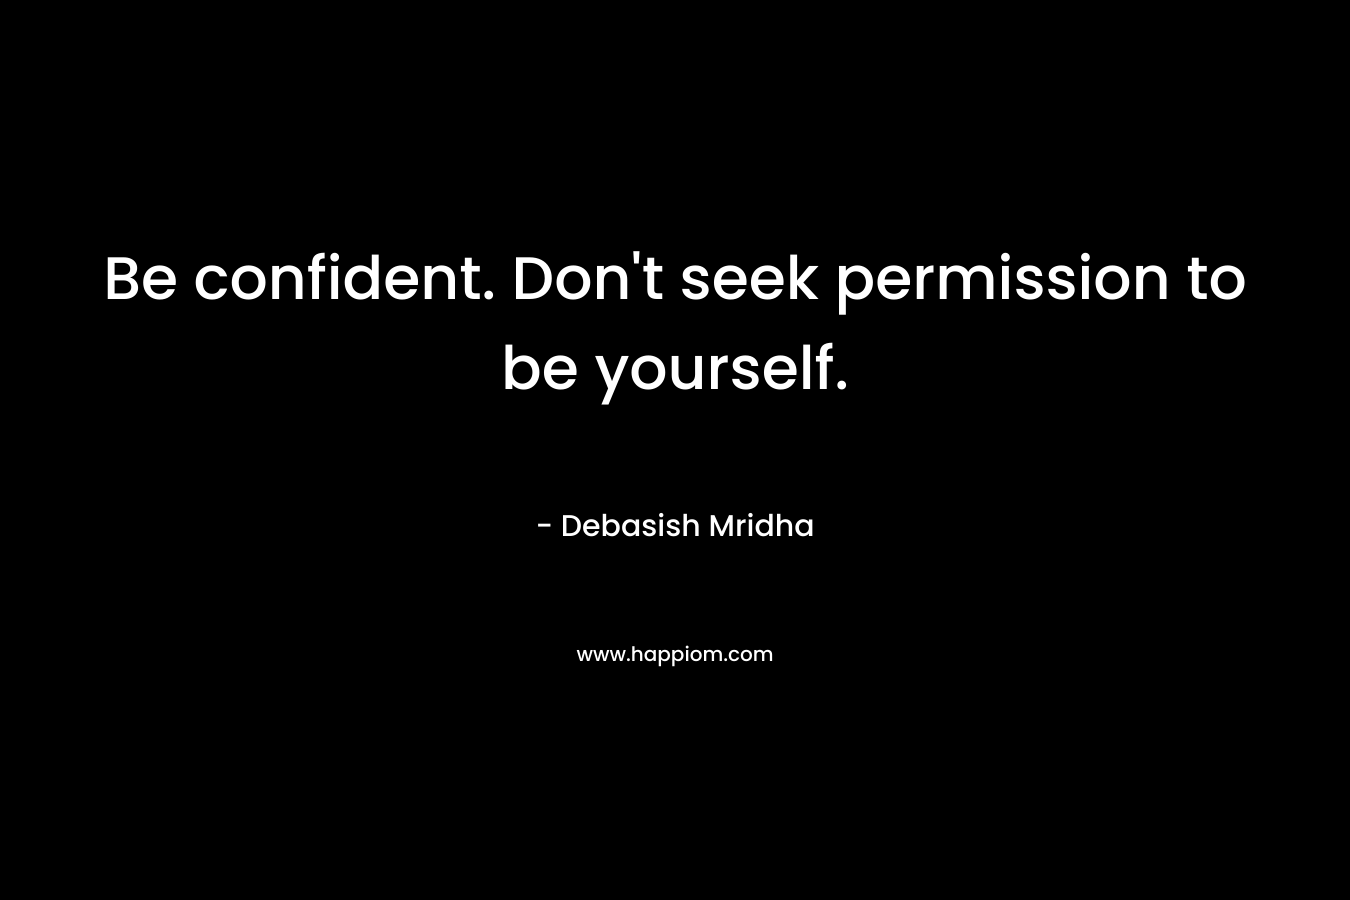 Be confident. Don't seek permission to be yourself.